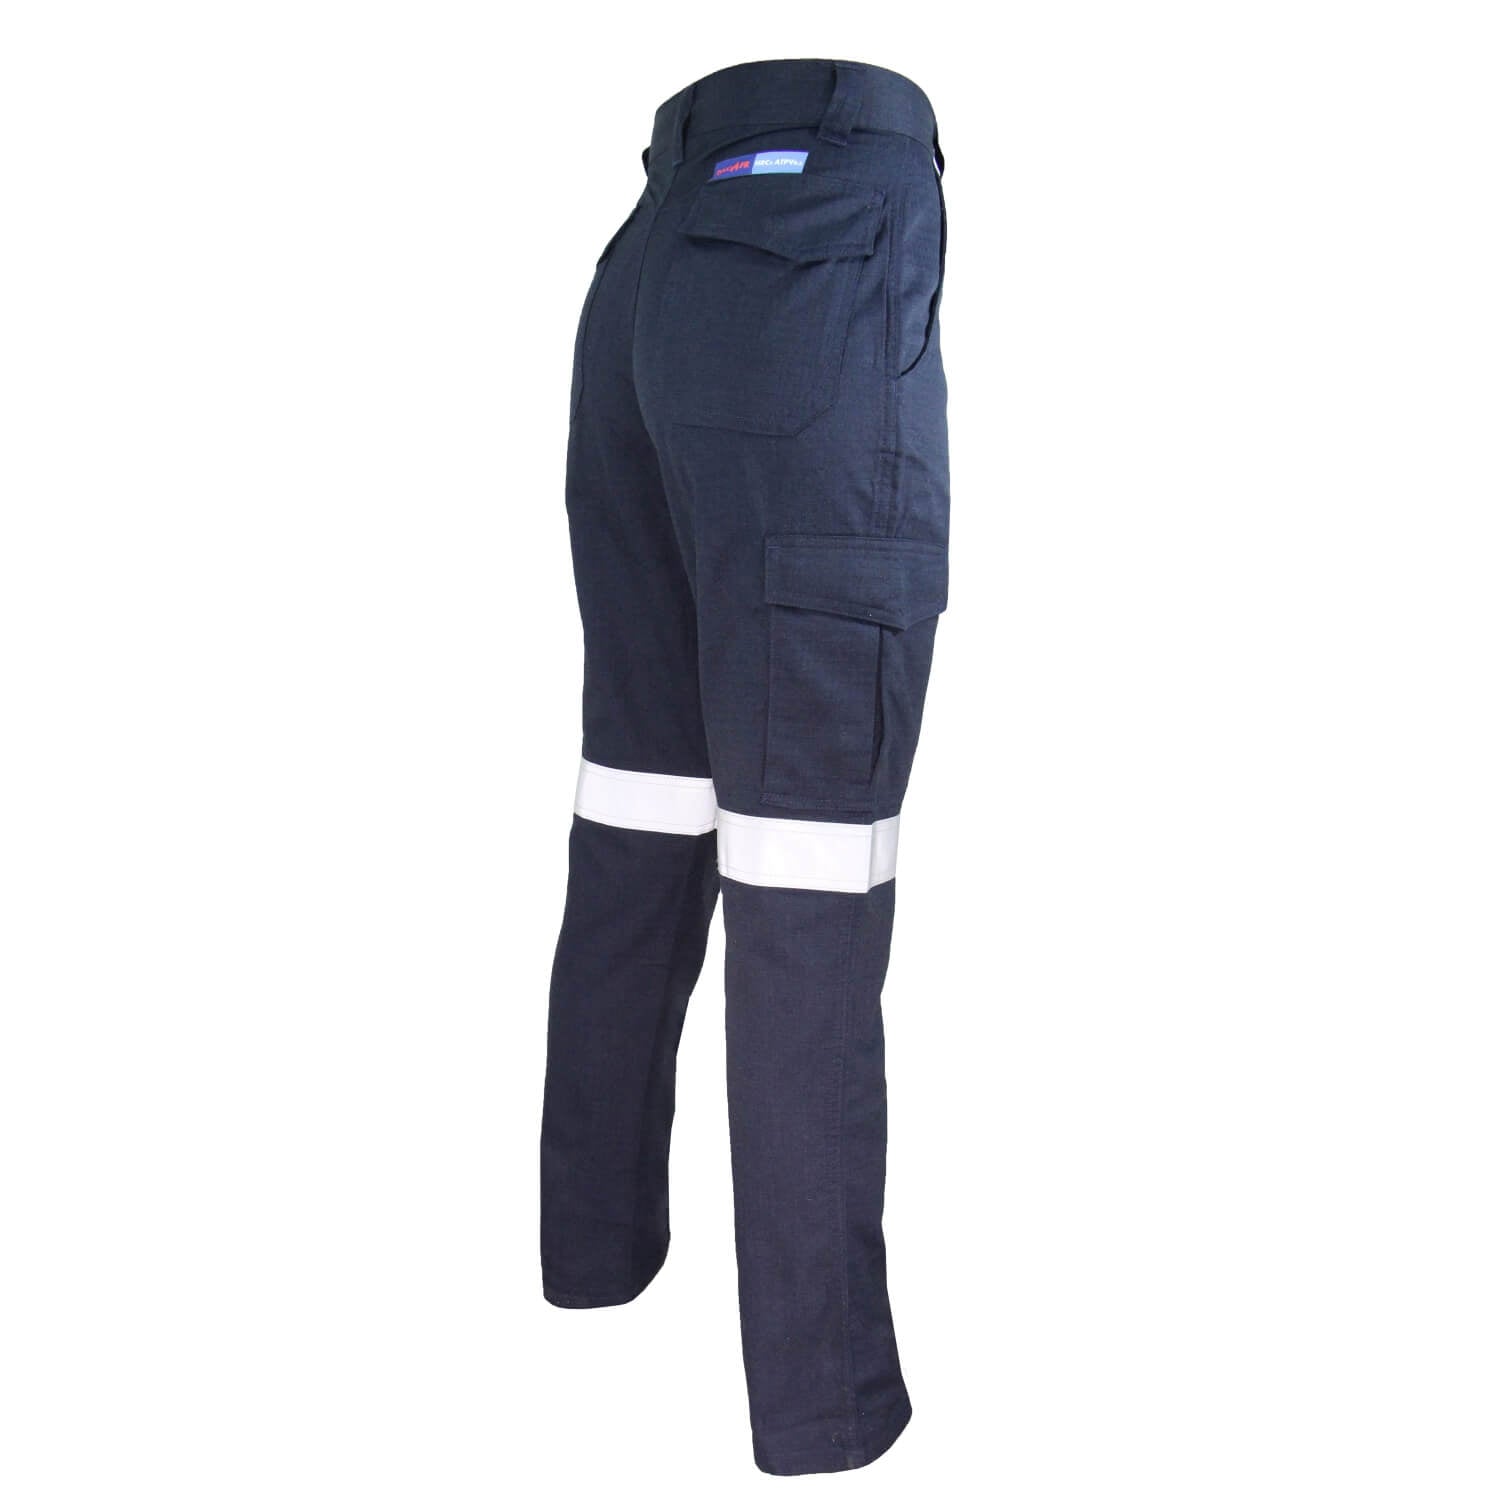 DNC Ladies Inherent FR PPE2 Taped Cargo Pants (3475)